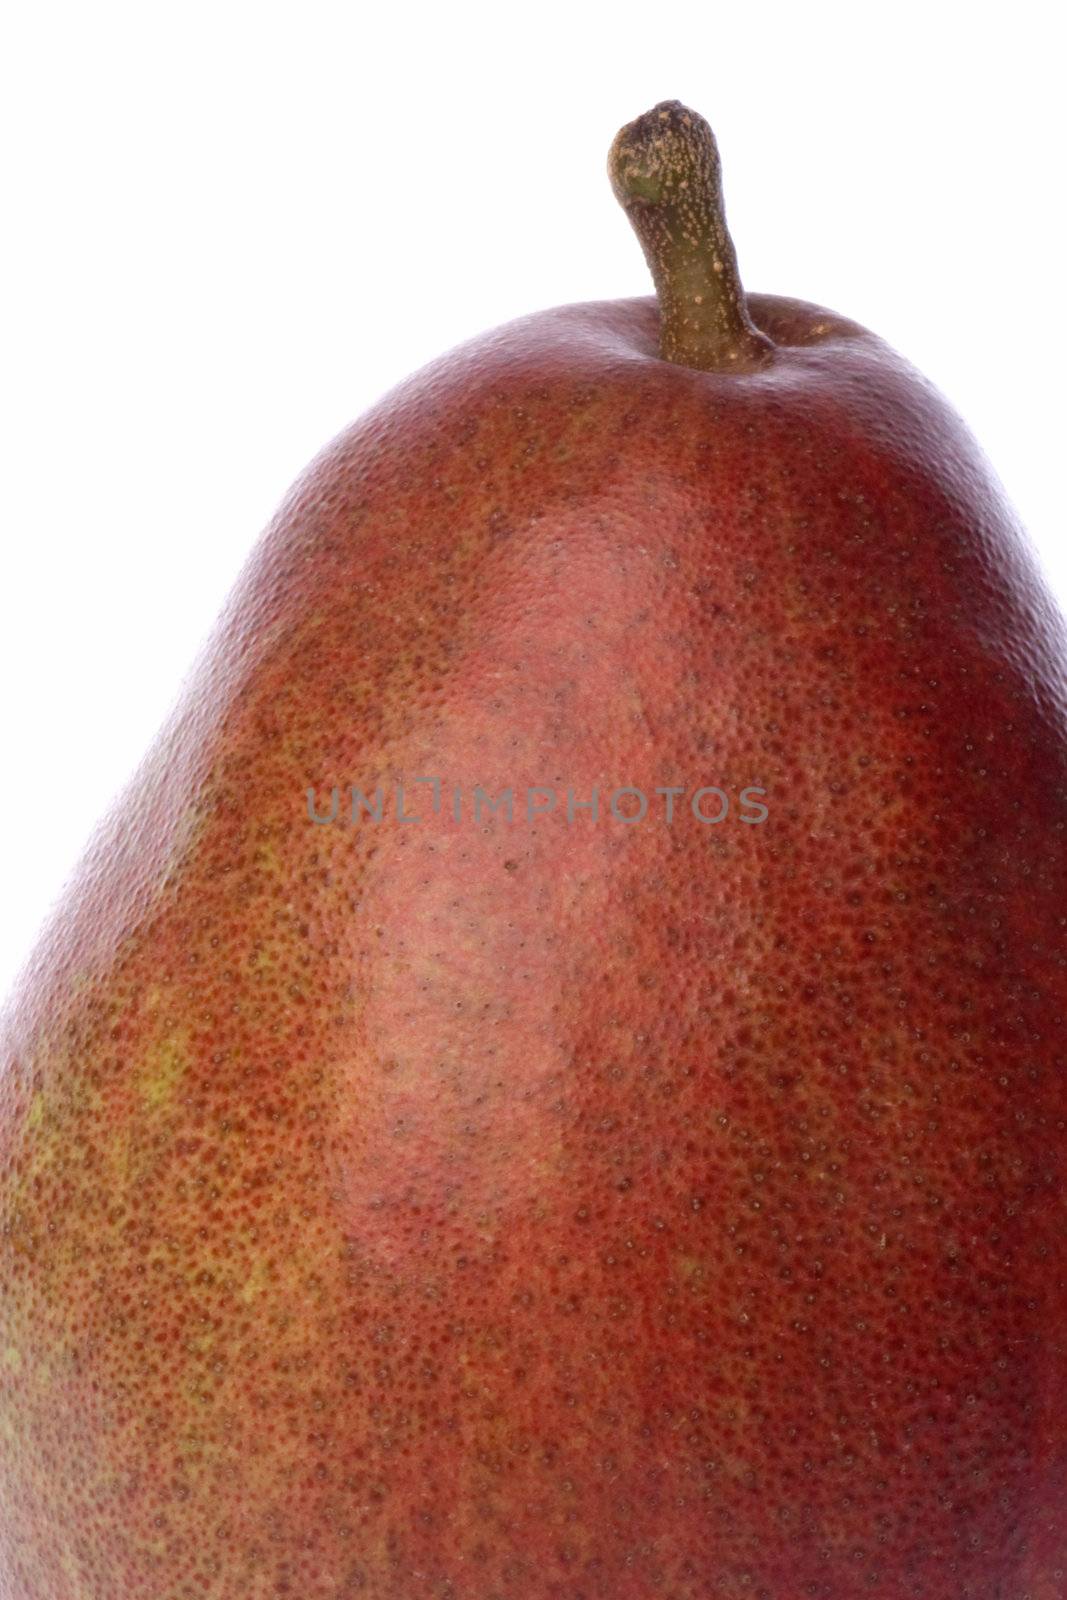 Isolated image of a fresh red apple.